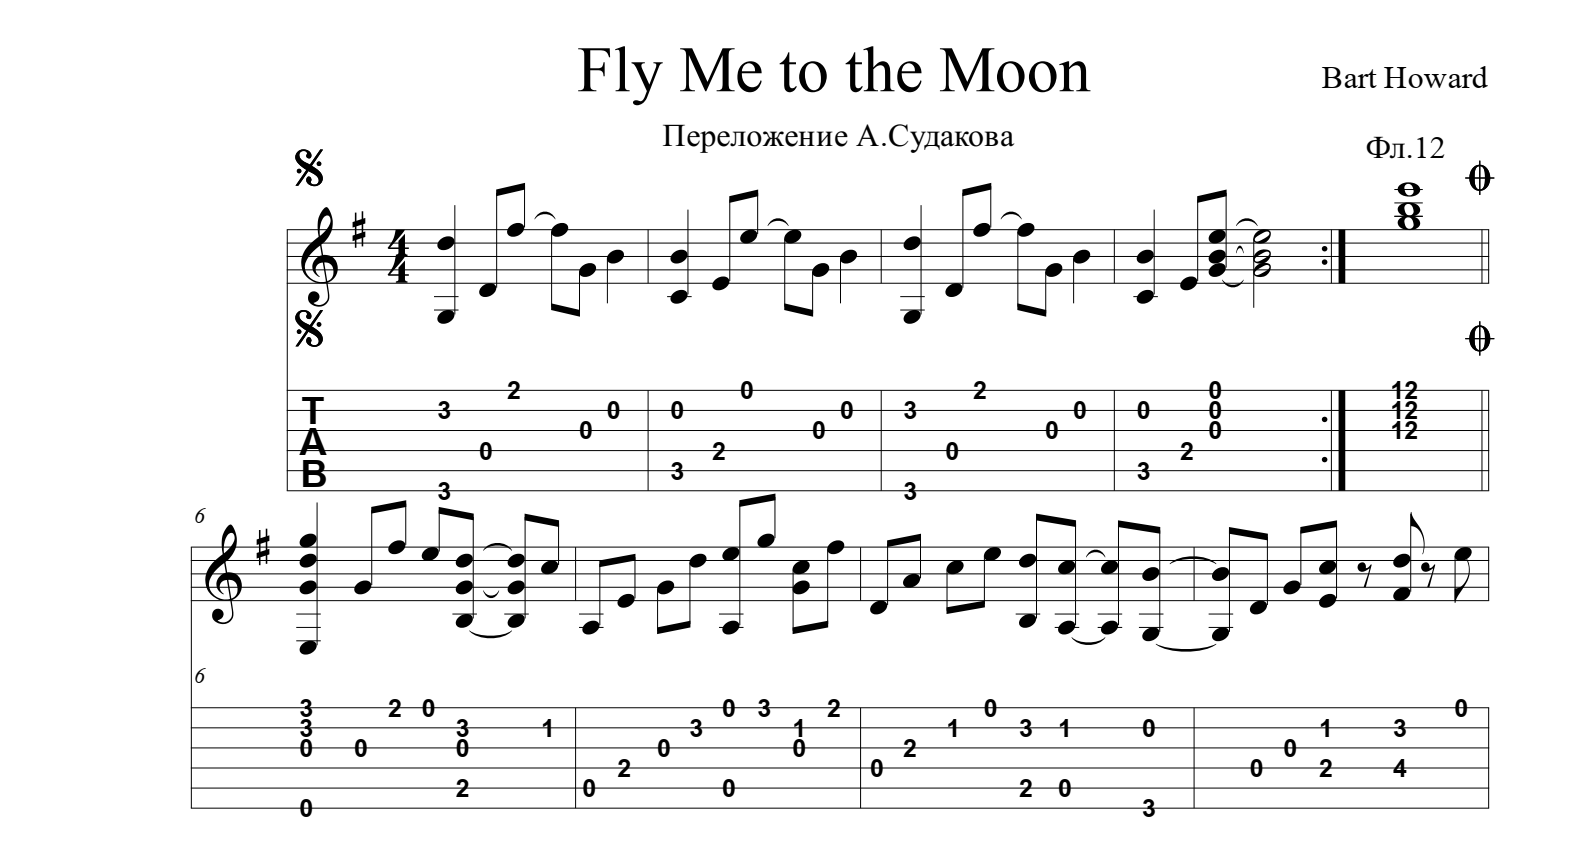 Fly Me to the Moon for guitar Guitar sheet music and tabs. 